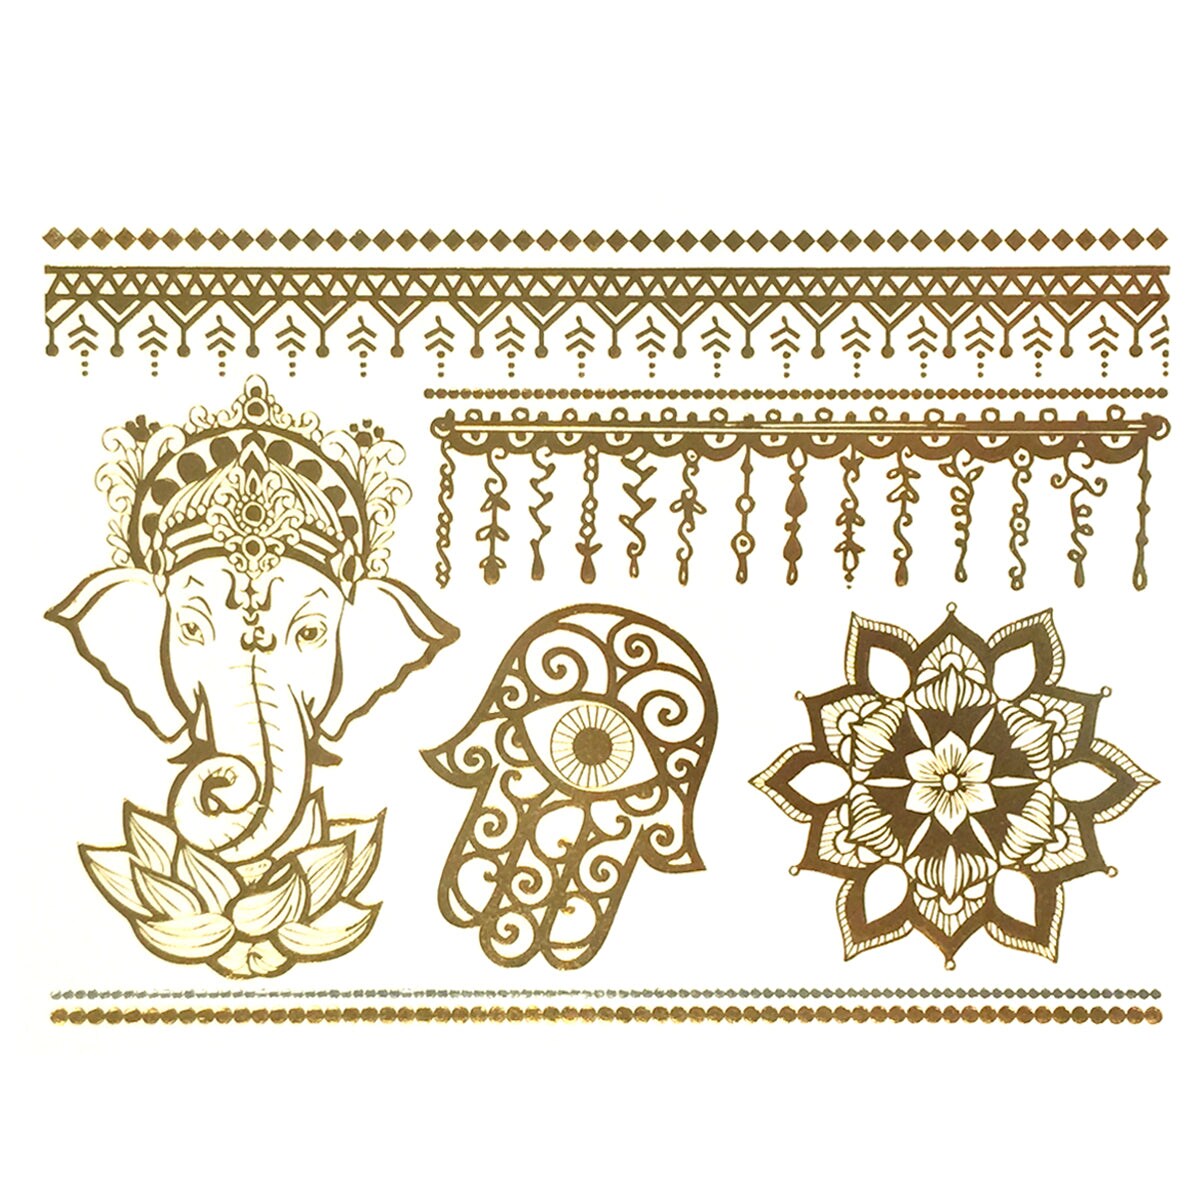 Wrapables Celebrity Inspired Temporary Tattoos in Metallic Gold Silver and Black, Hindu, Large